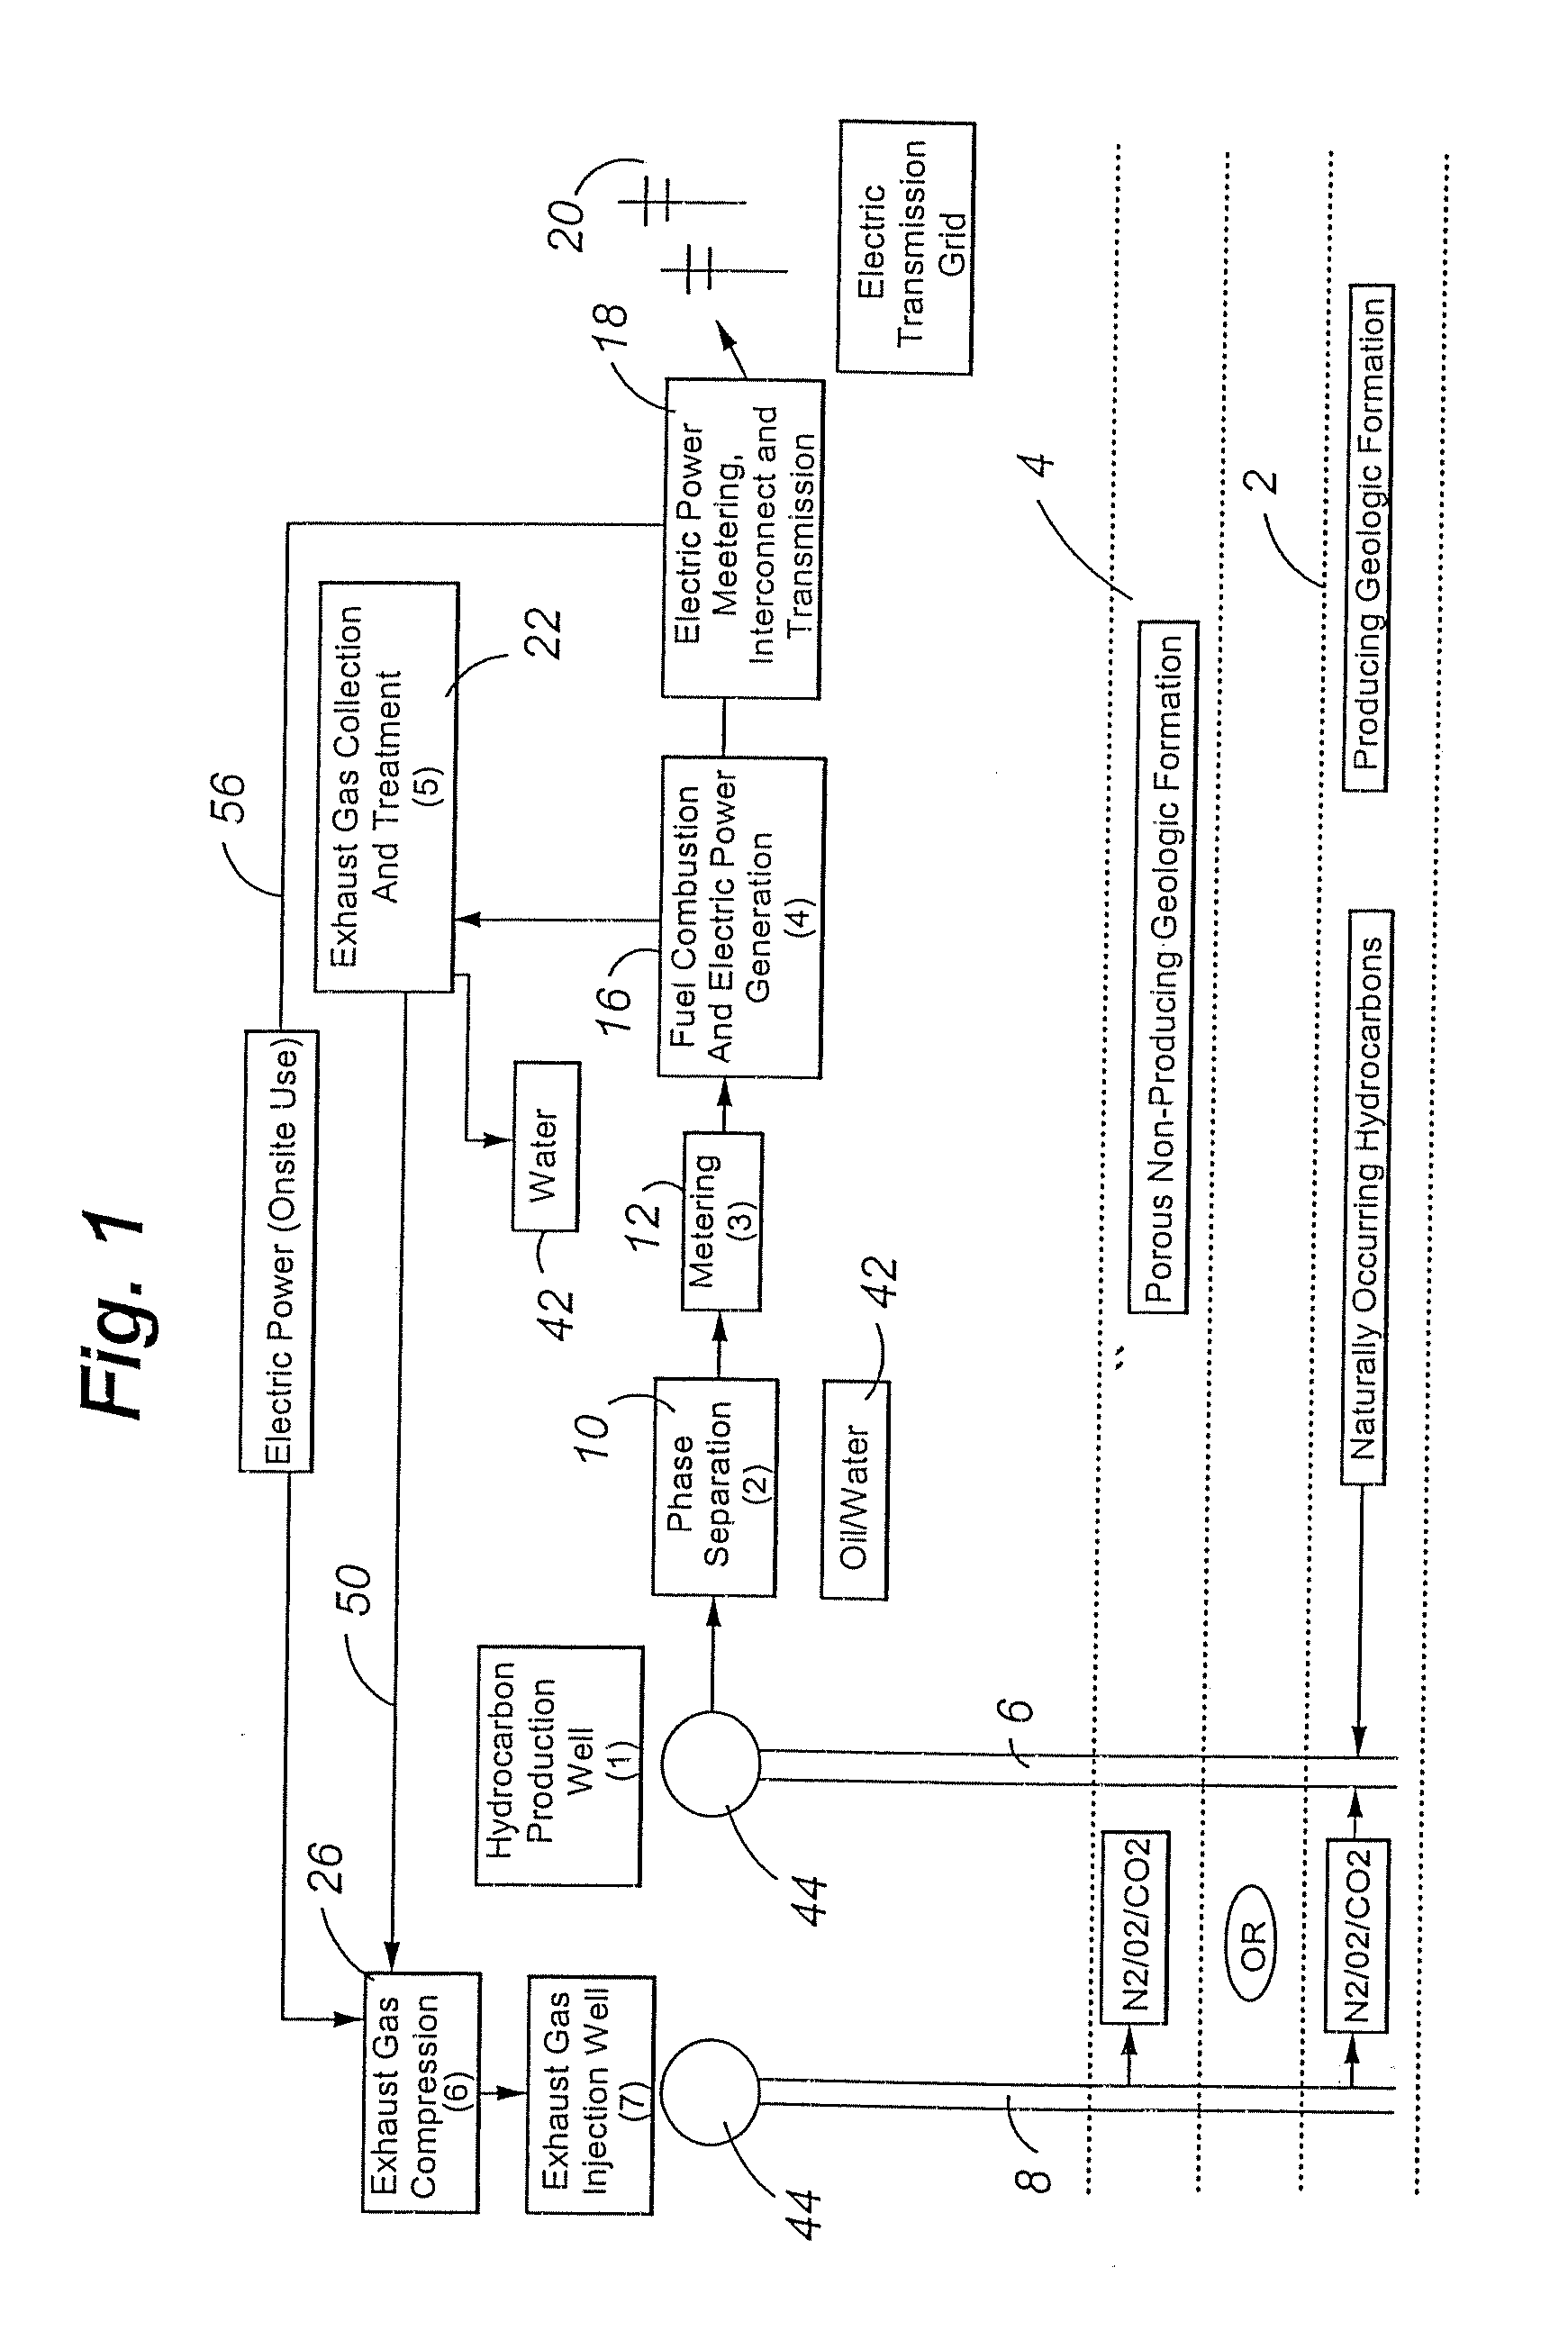 Method and apparatus for generating pollution free electrical energy from hydrocarbons